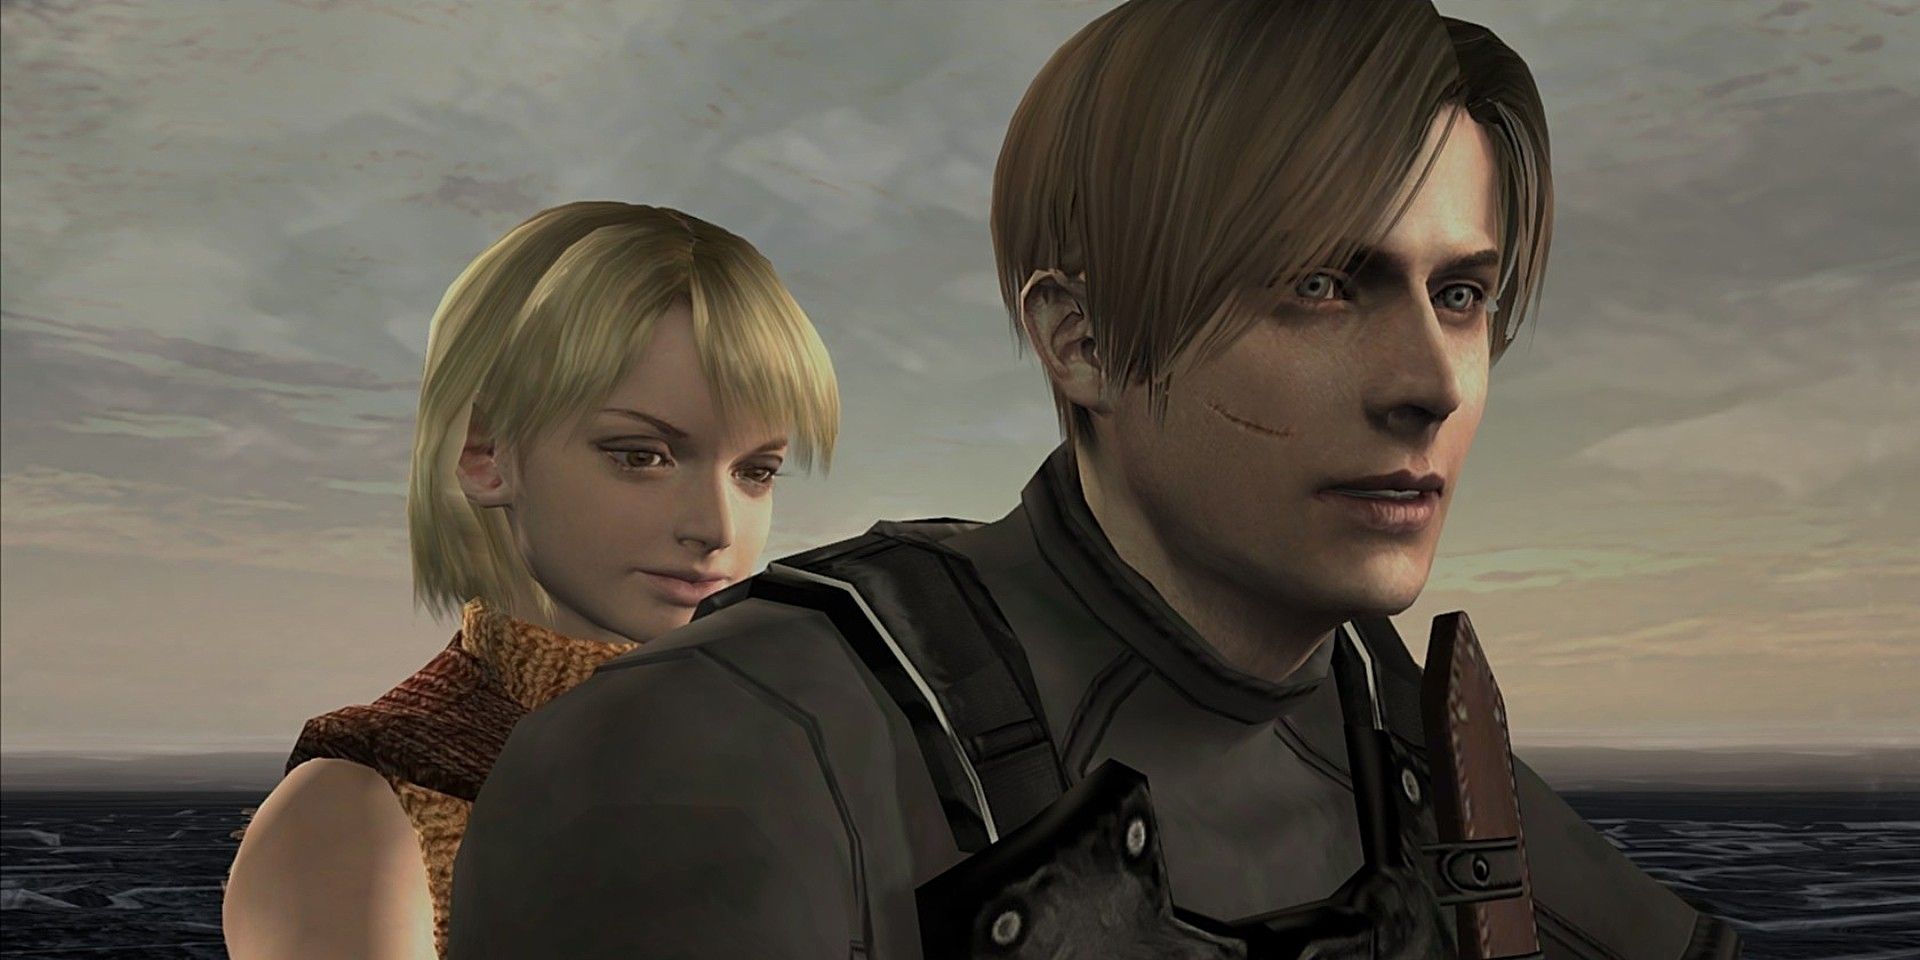 Resident Evil 4: What Happened To Ashley After RE4's Ending